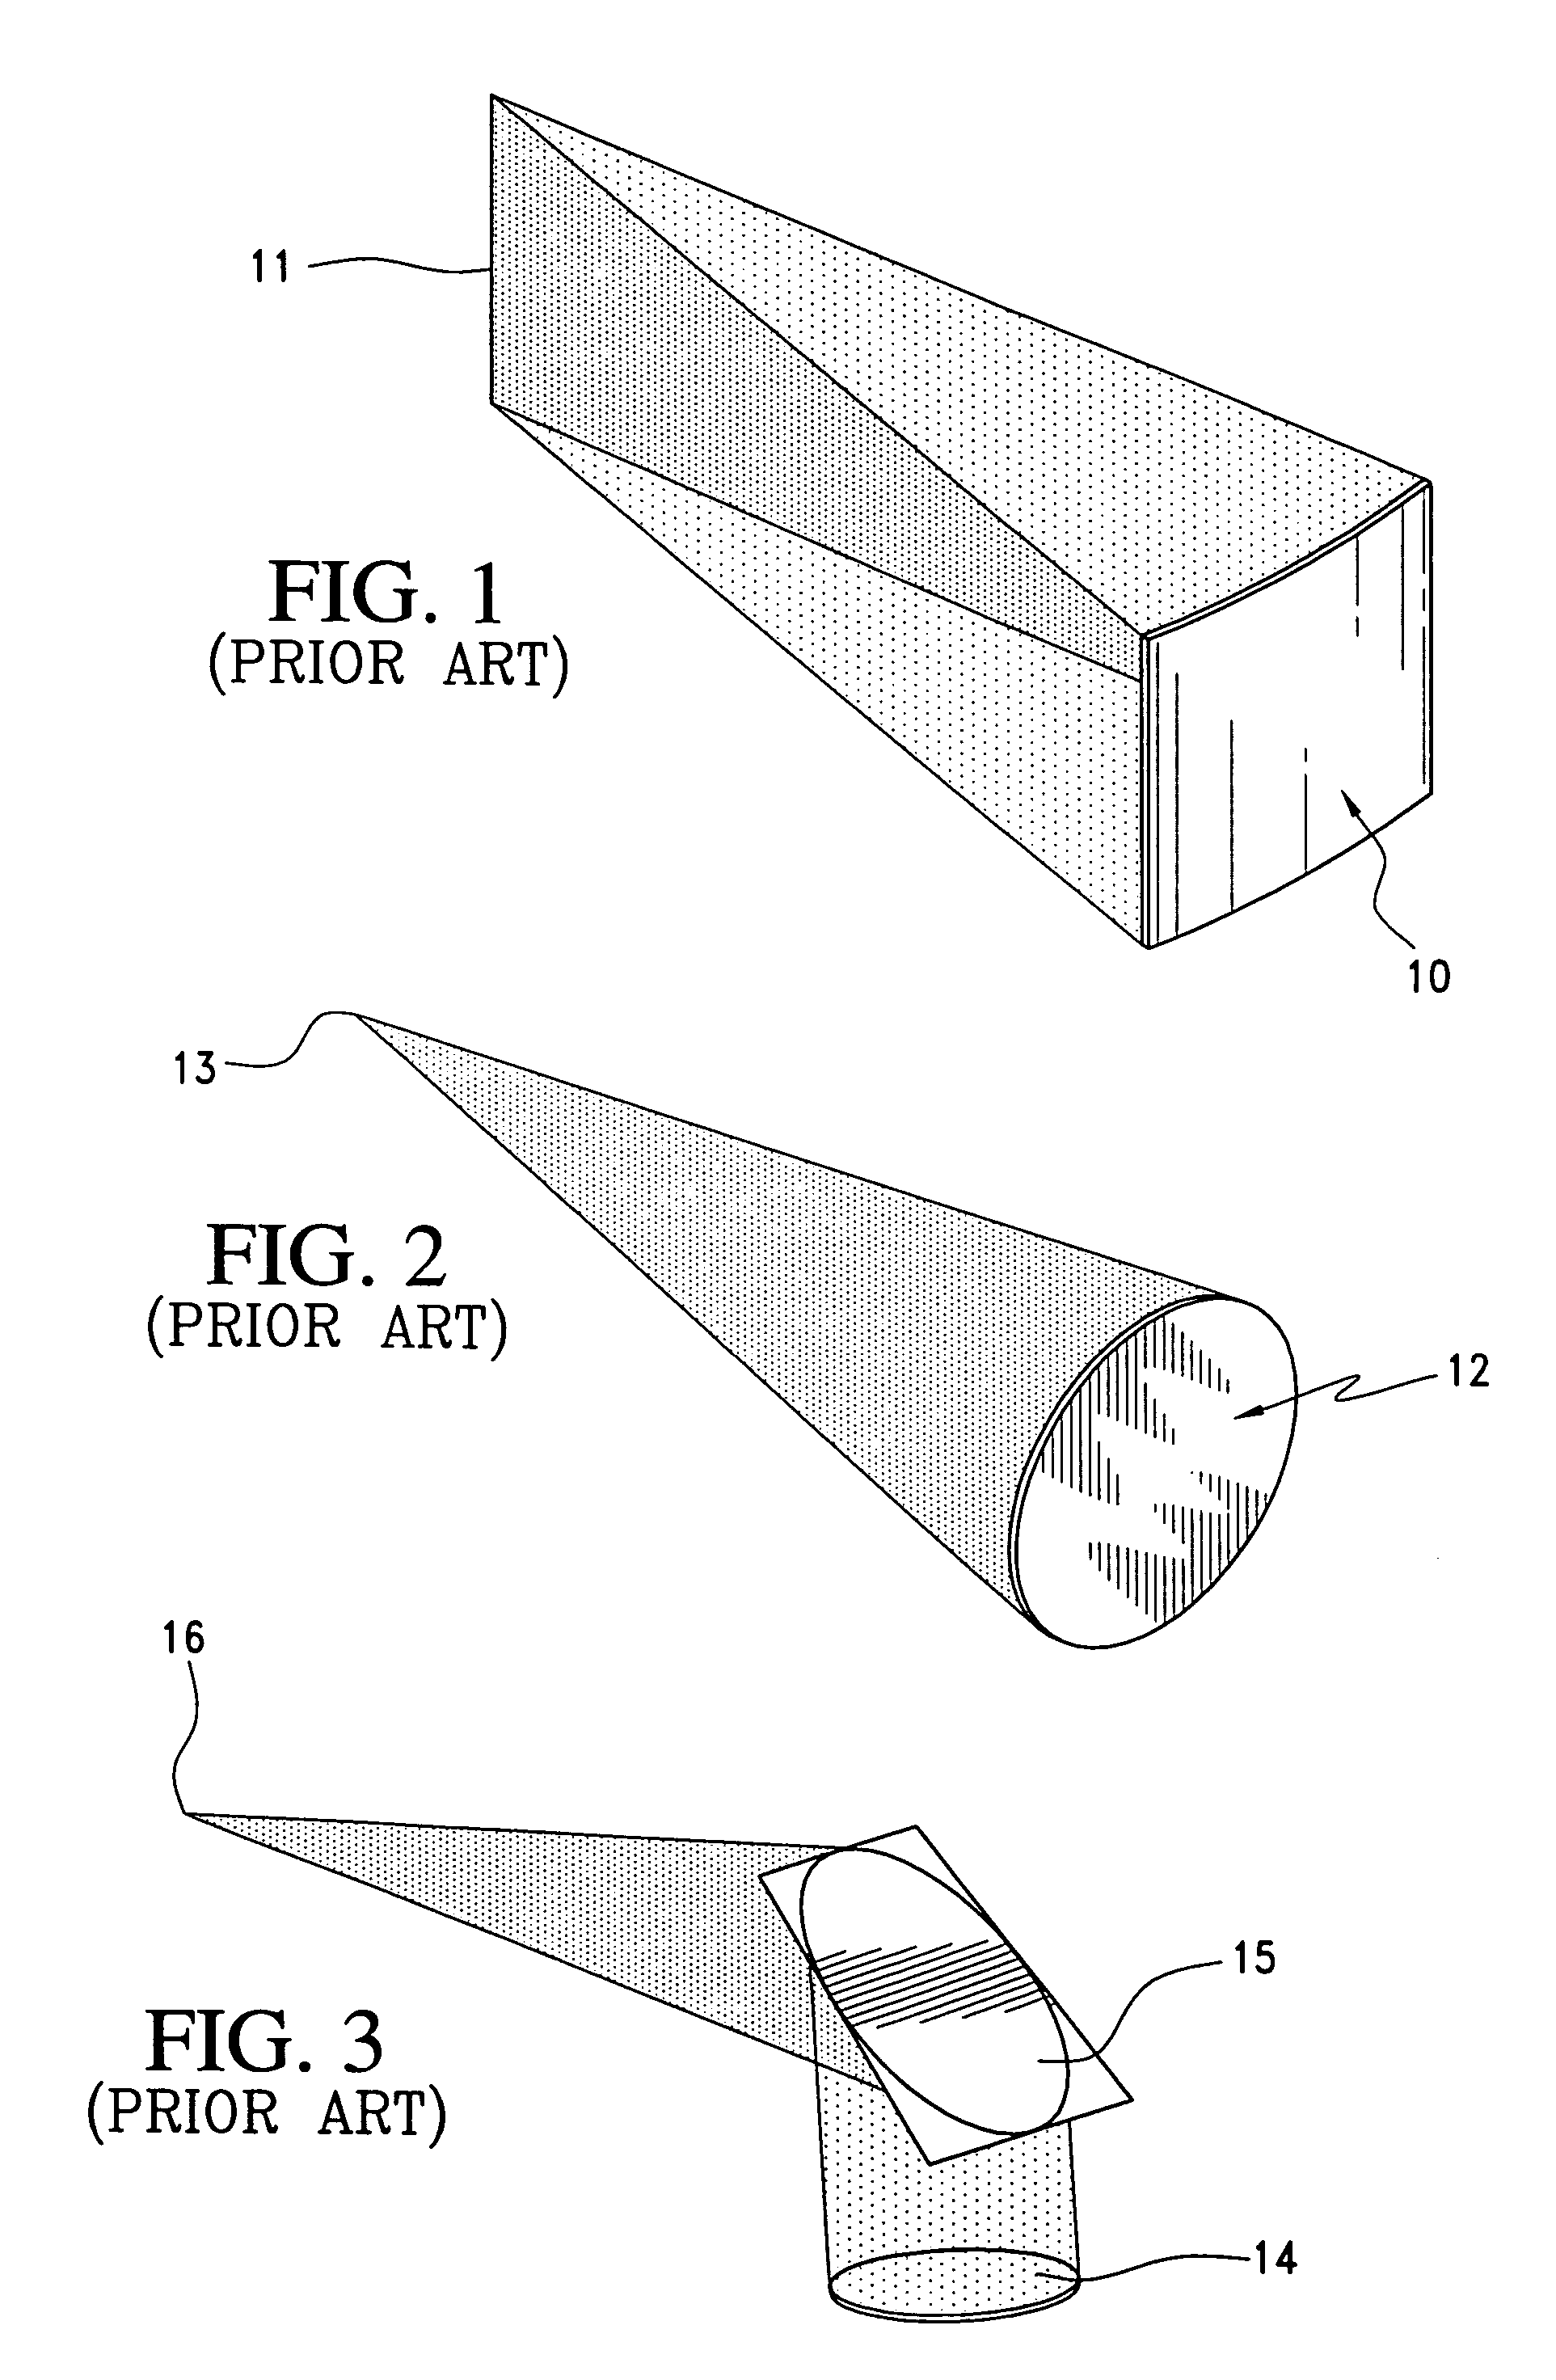 Transducers for focusing sonic energy in transmitting and receiving device